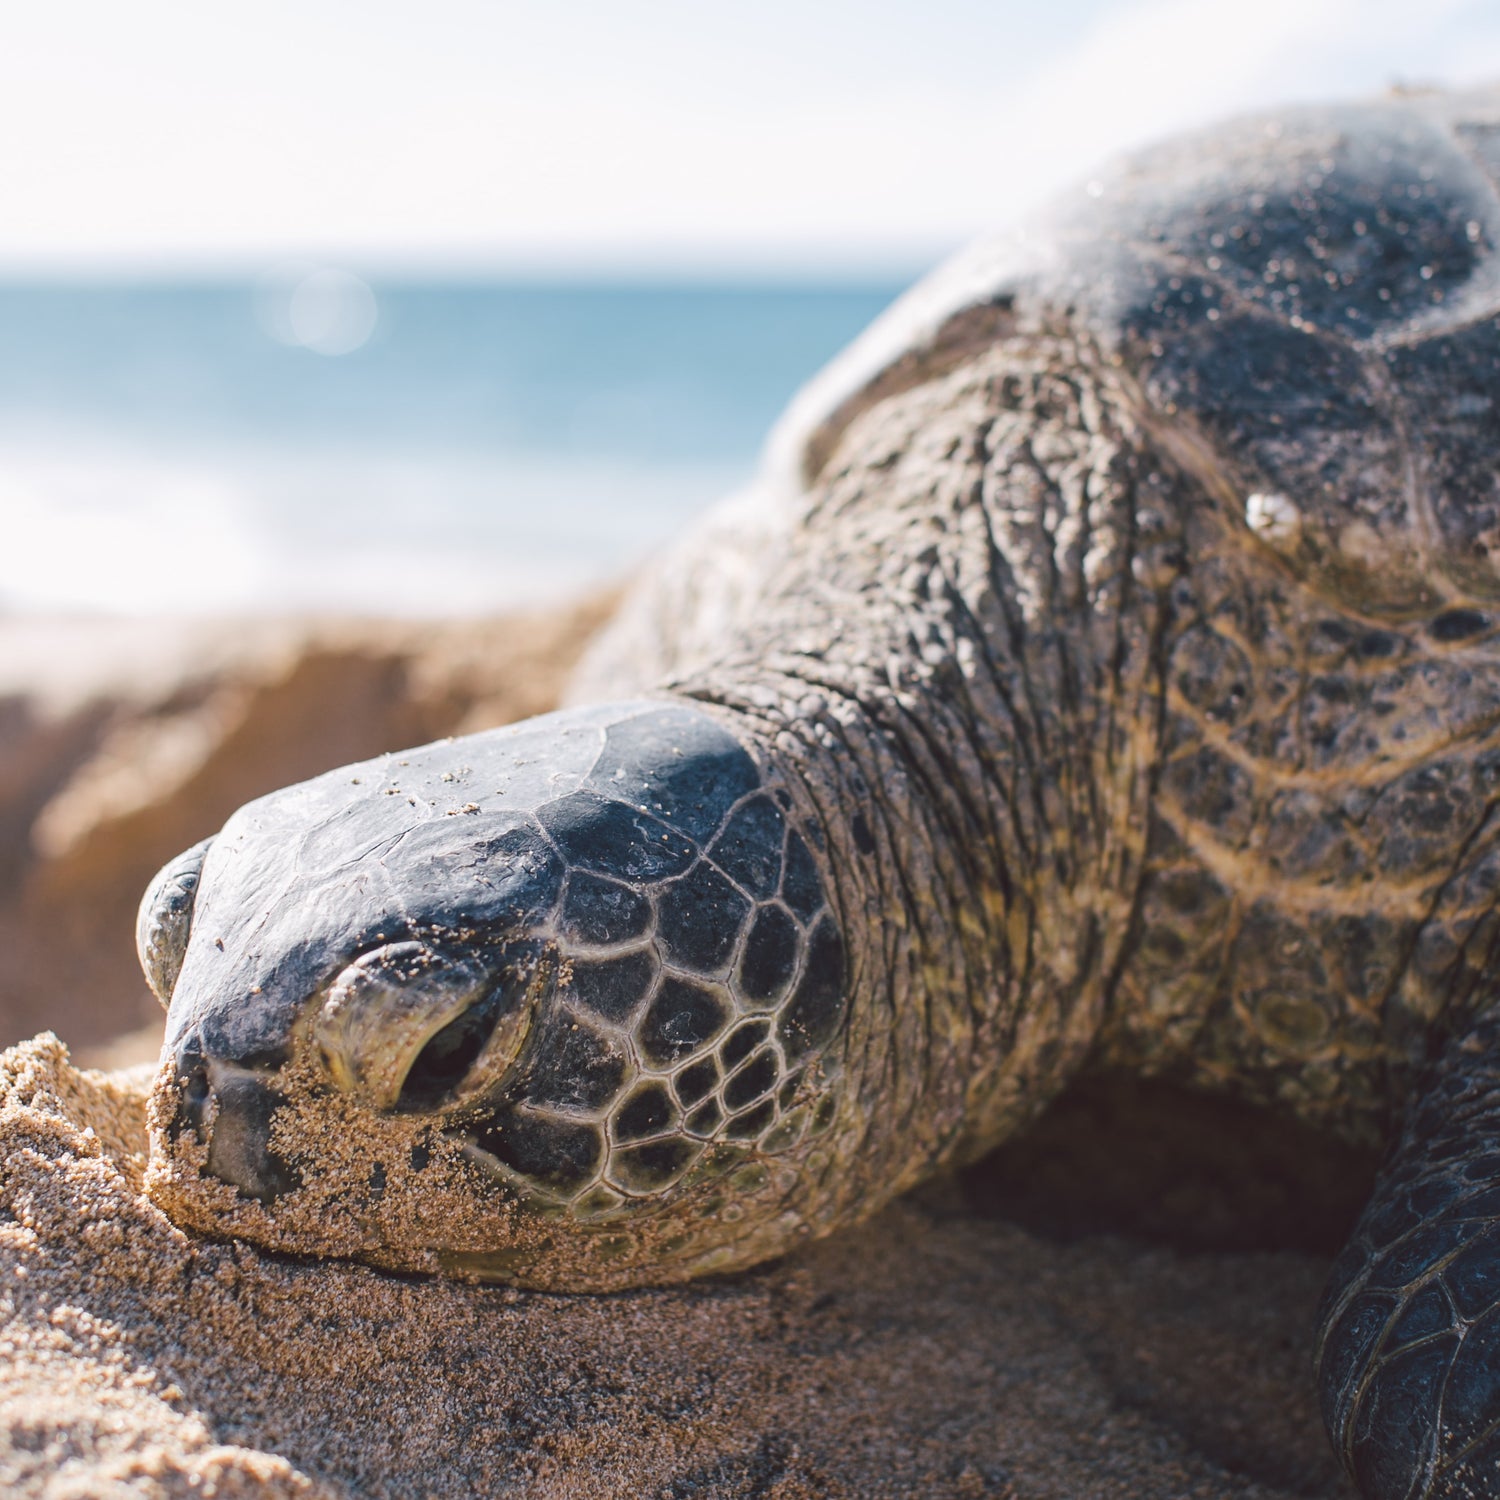 sea turtle resting on a beach in the sunlight - Connected Clothing Company donates 10% to Sea Turtle Conservancy conservation efforts